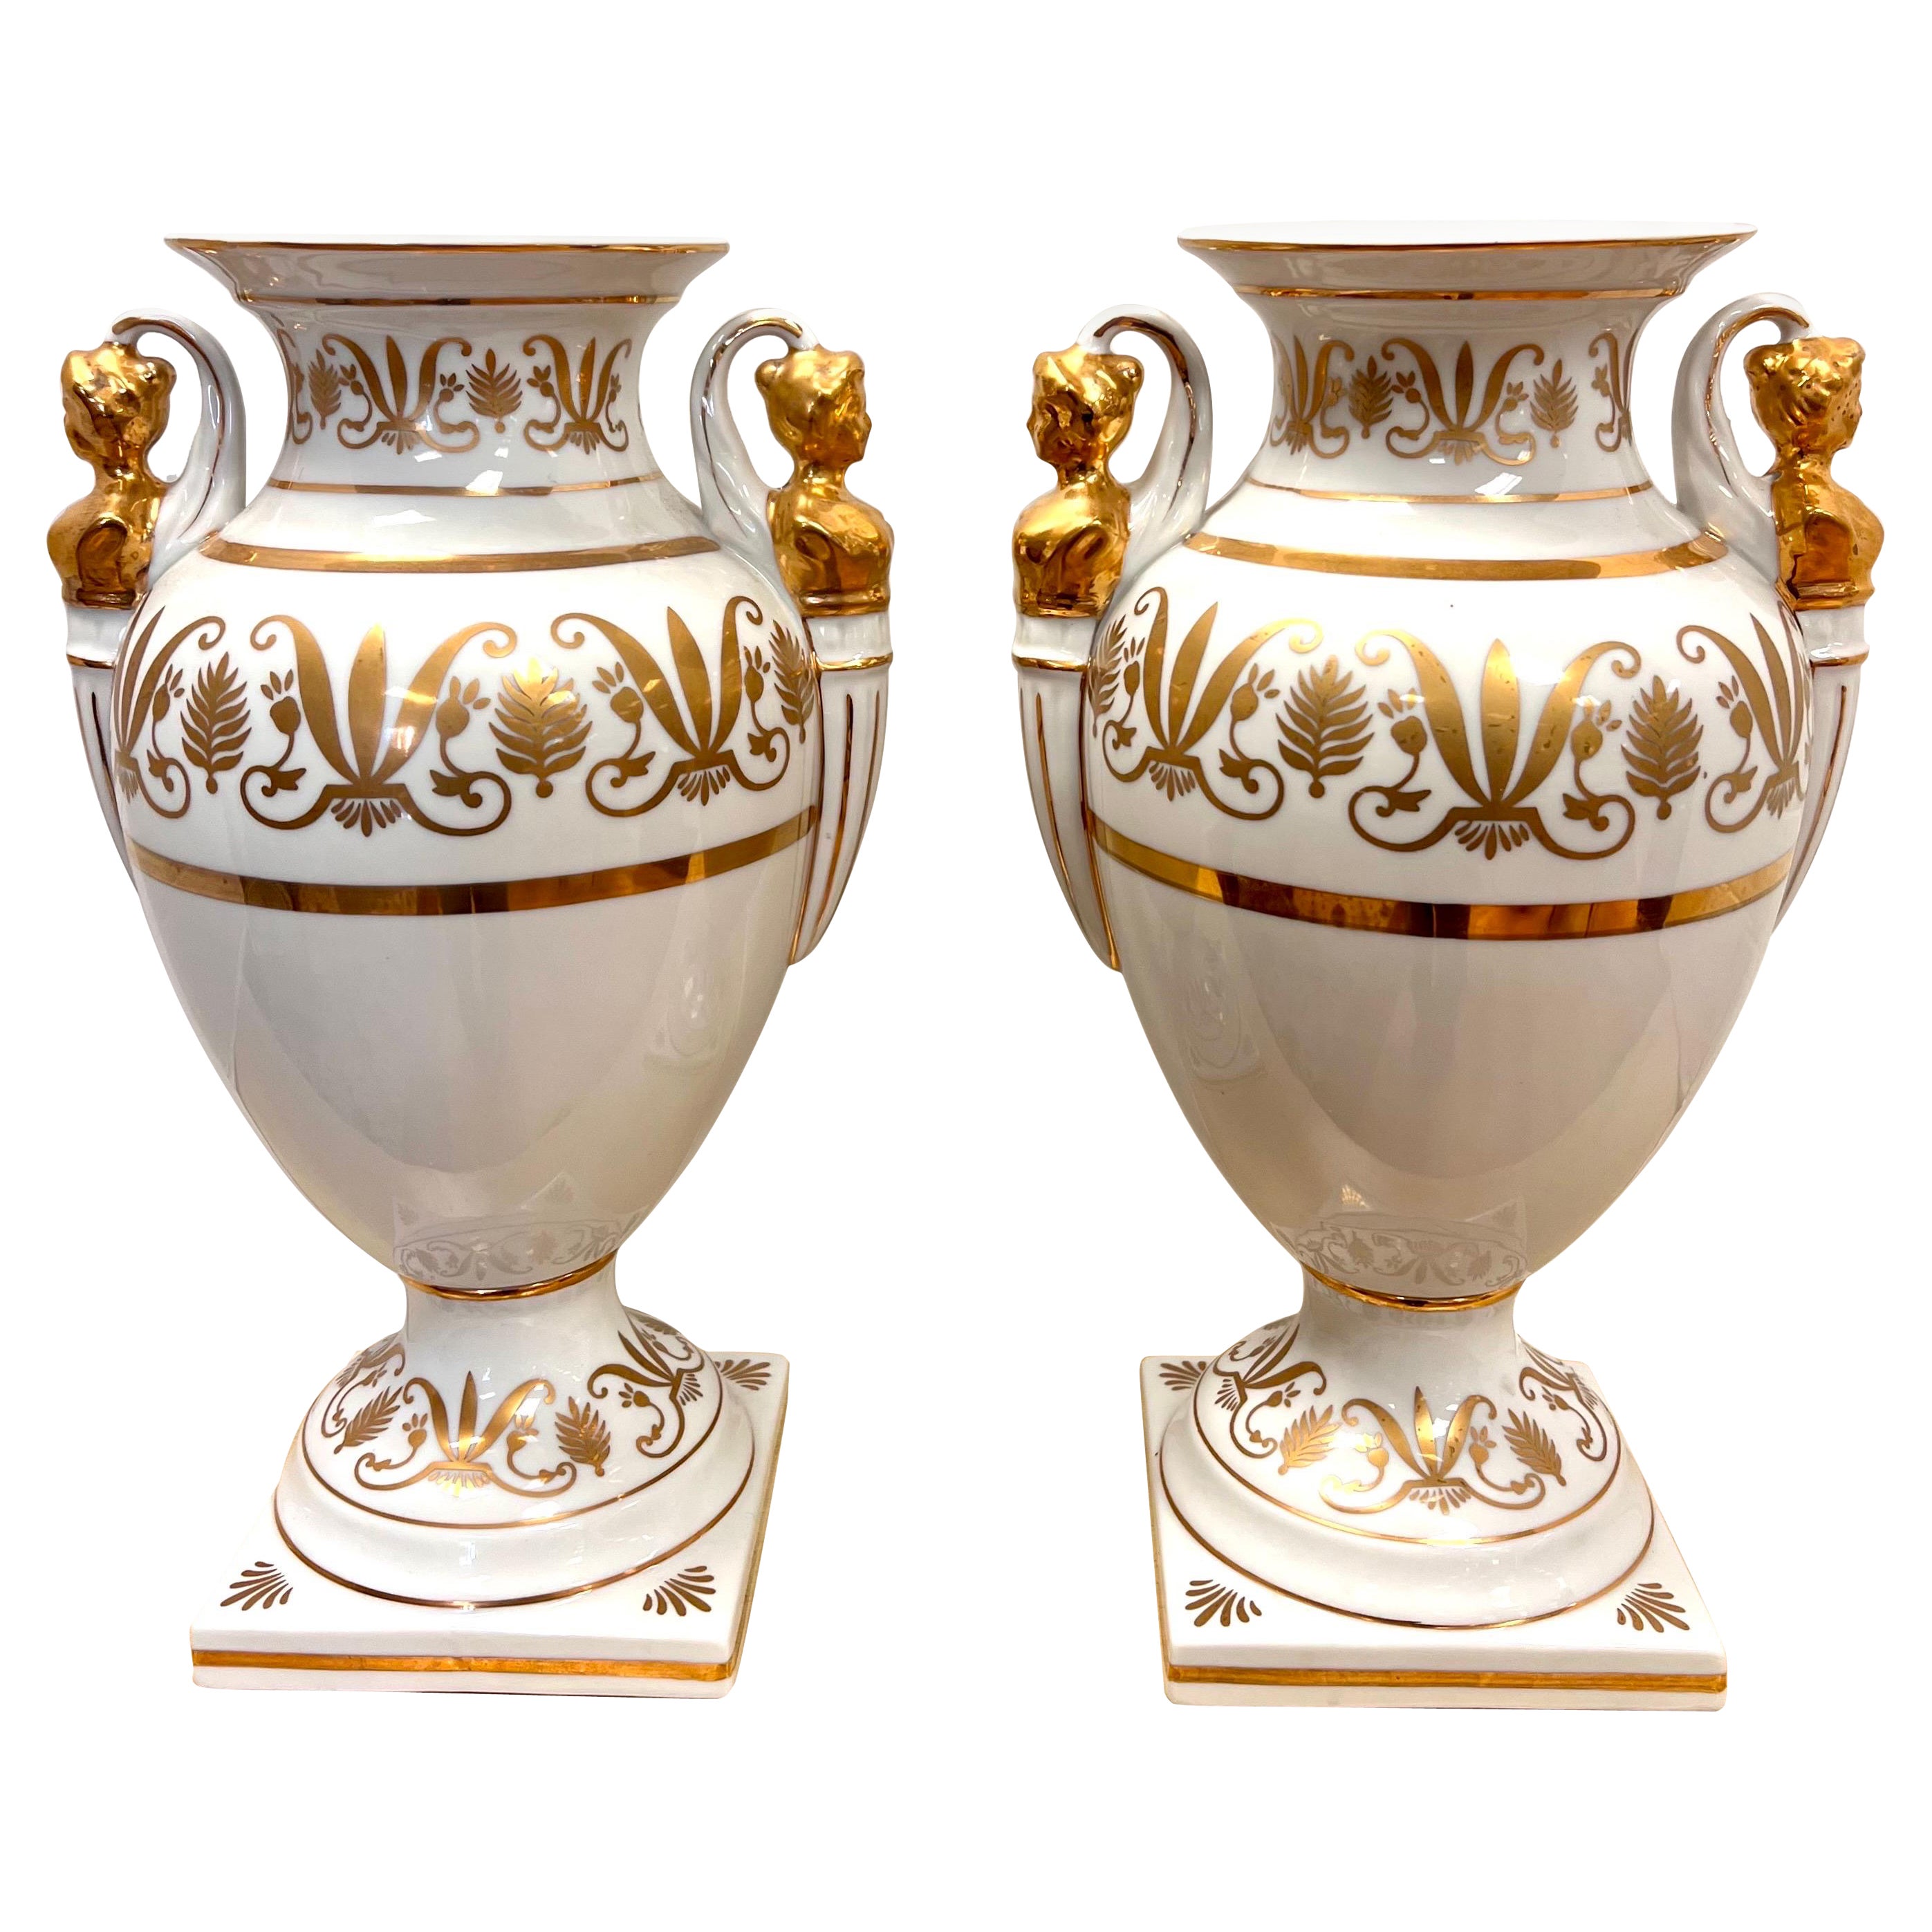 Pair of Neoclassical Campana Porcelain Gold and White Female Figural Urns